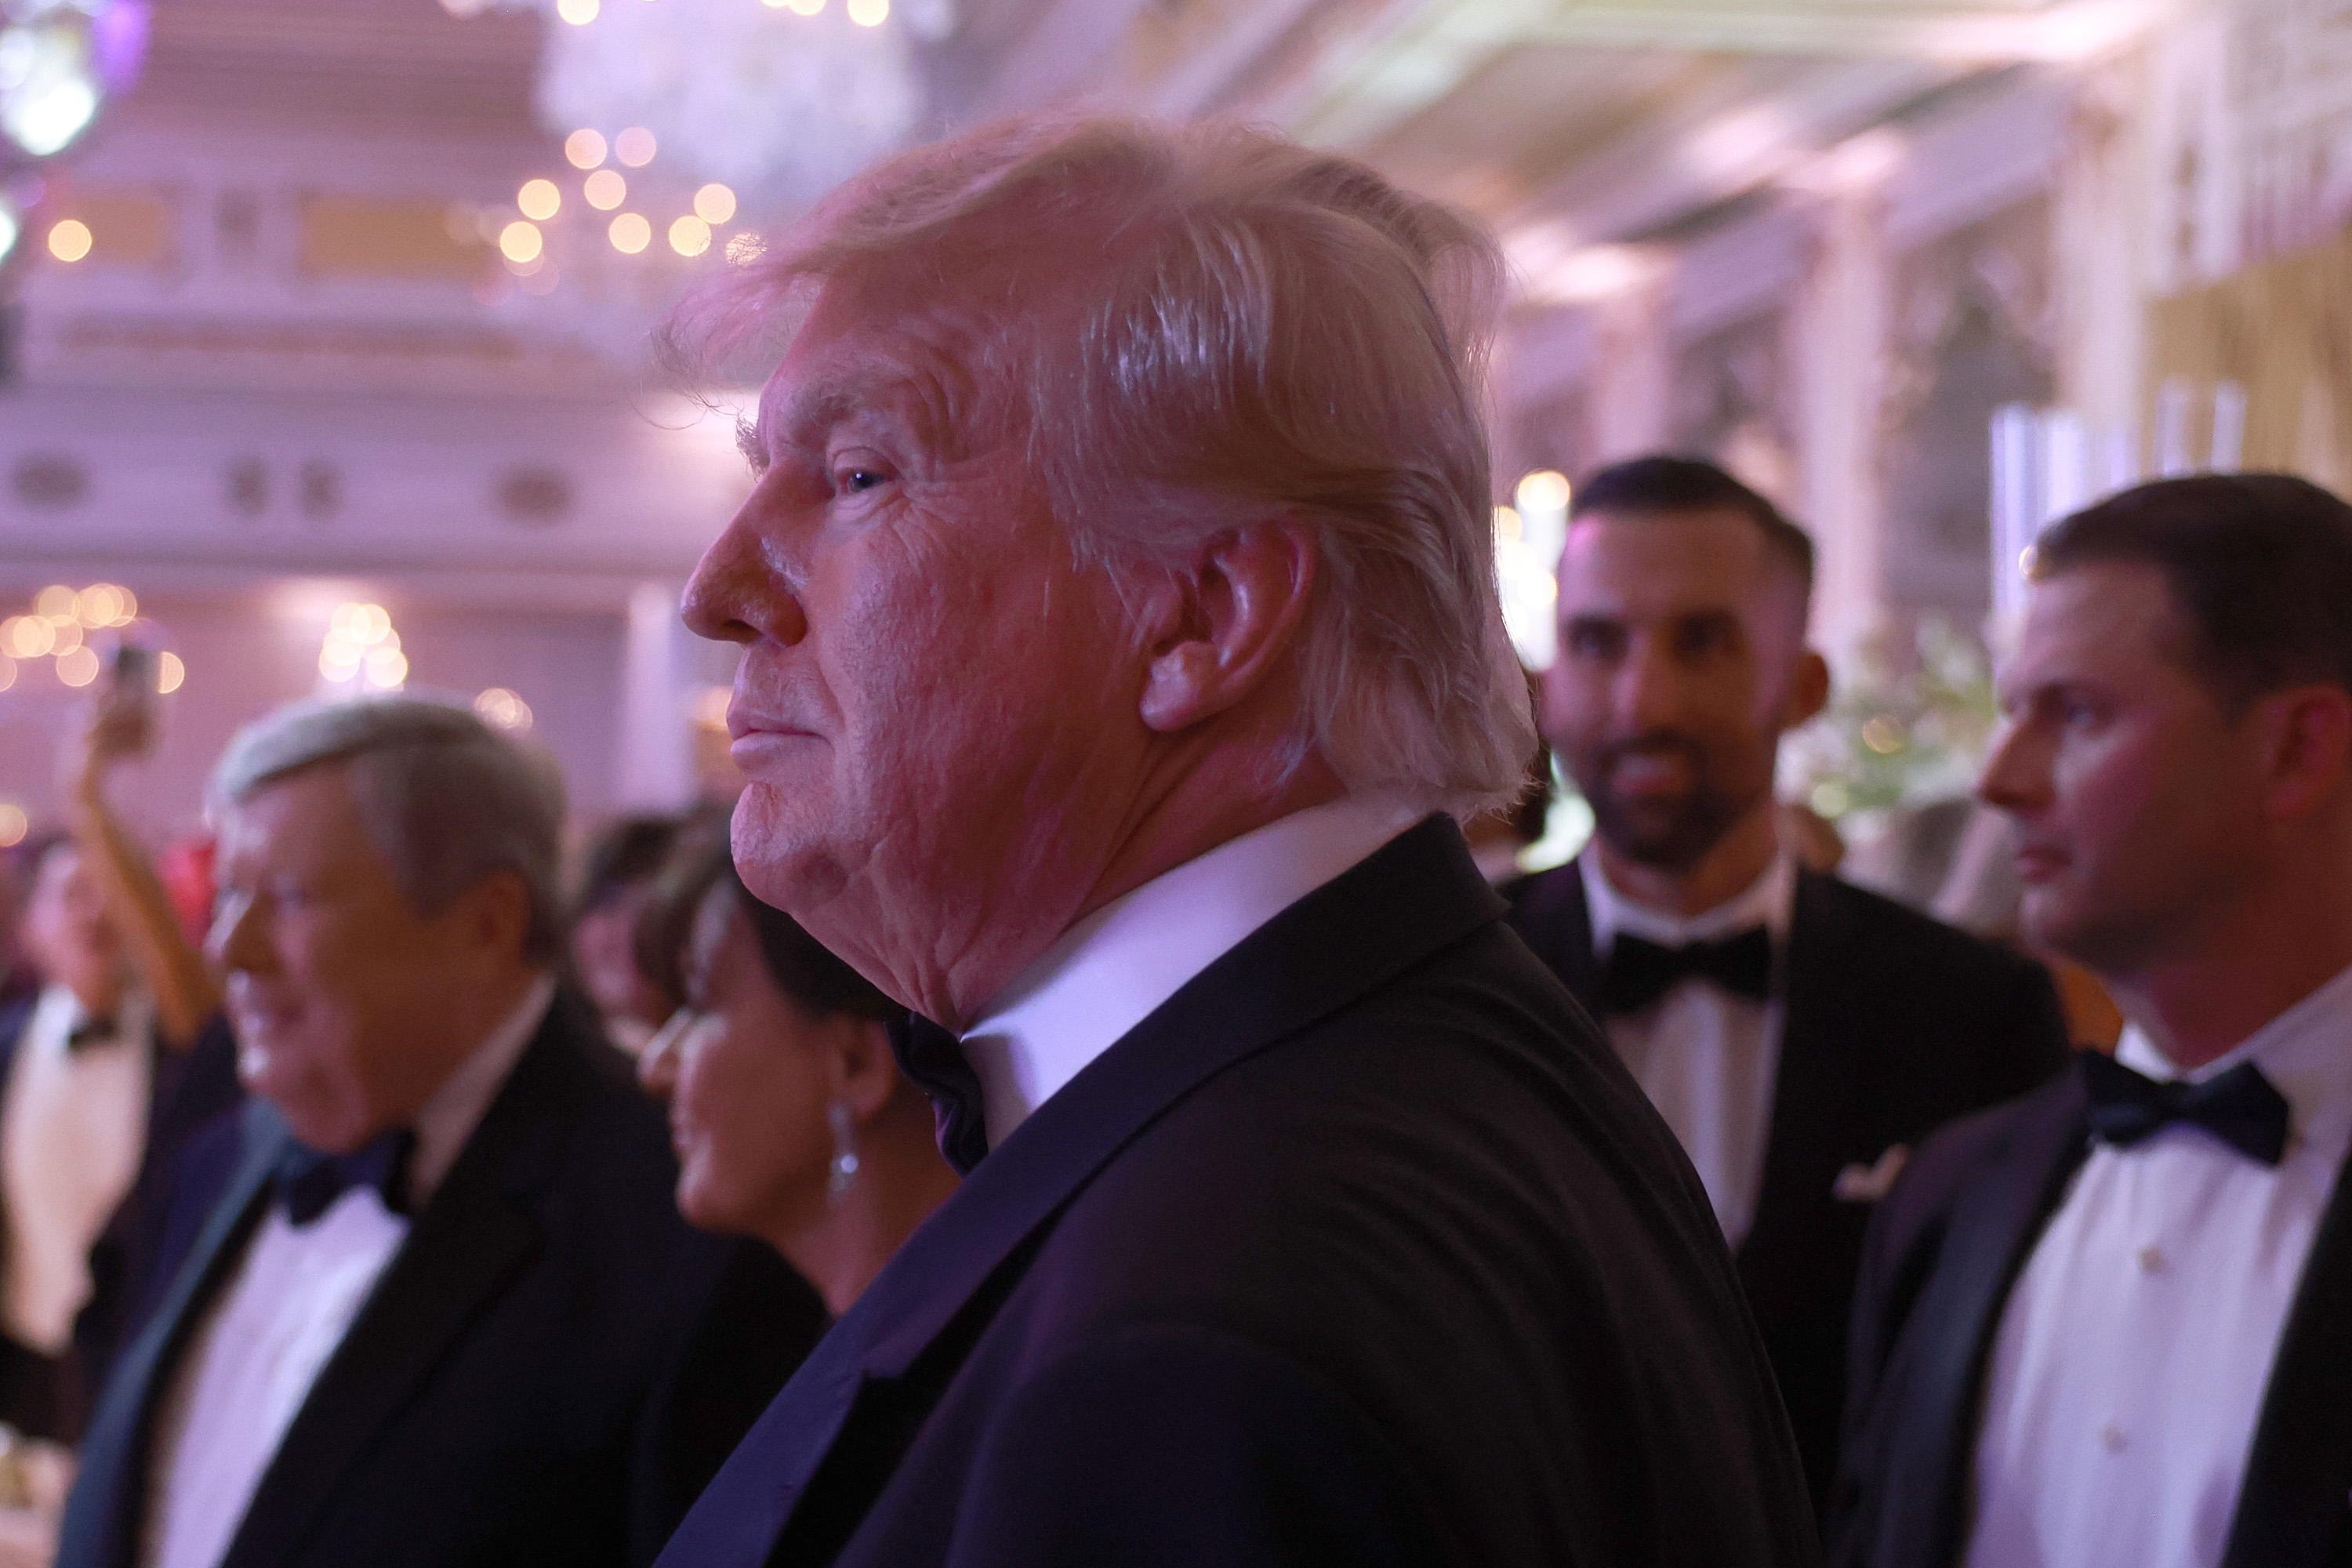 Donald Trump surrounded by people wearing formalwear.